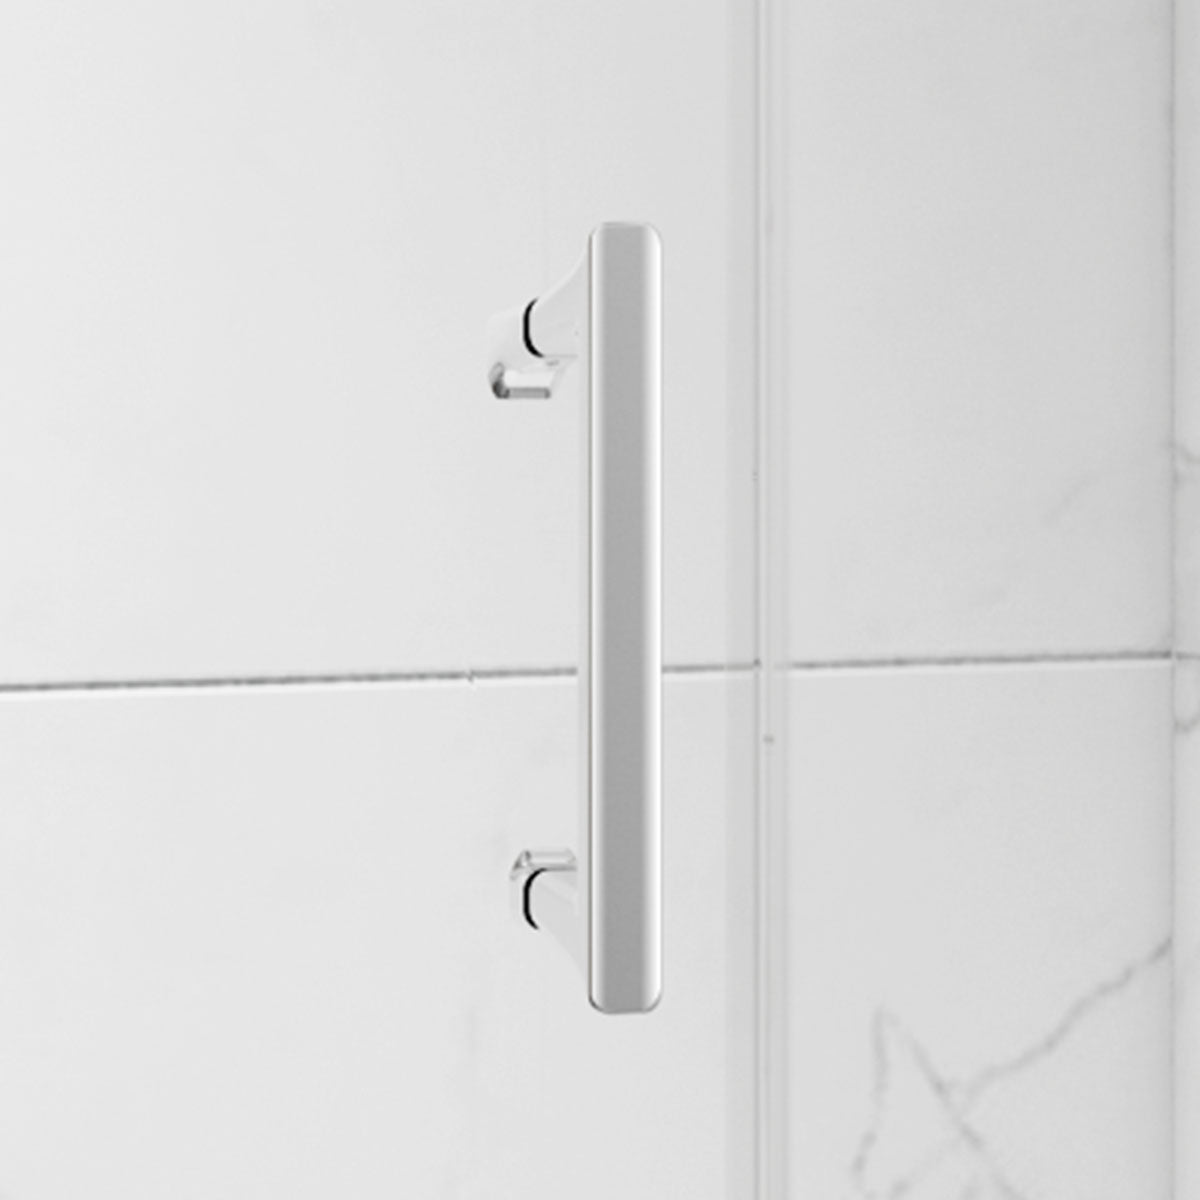 Merlyn 6 Series Sleek Sliding Shower Door With Inline Panel and Side Panel - Chrome